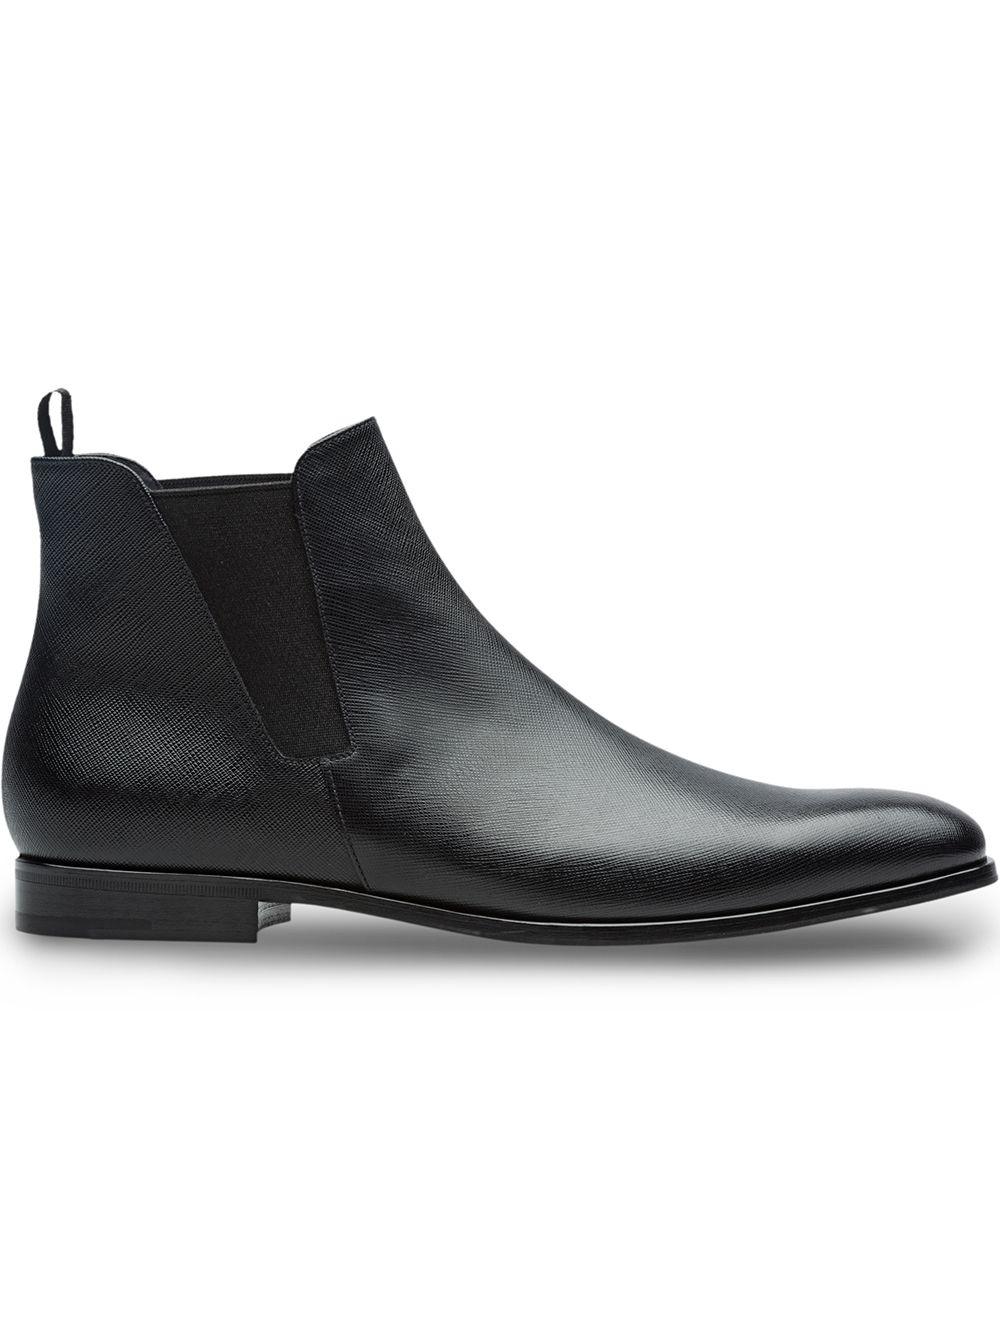 Prada Leather Brushed Chelsea Boots in Nero (Black) for Men - Save 